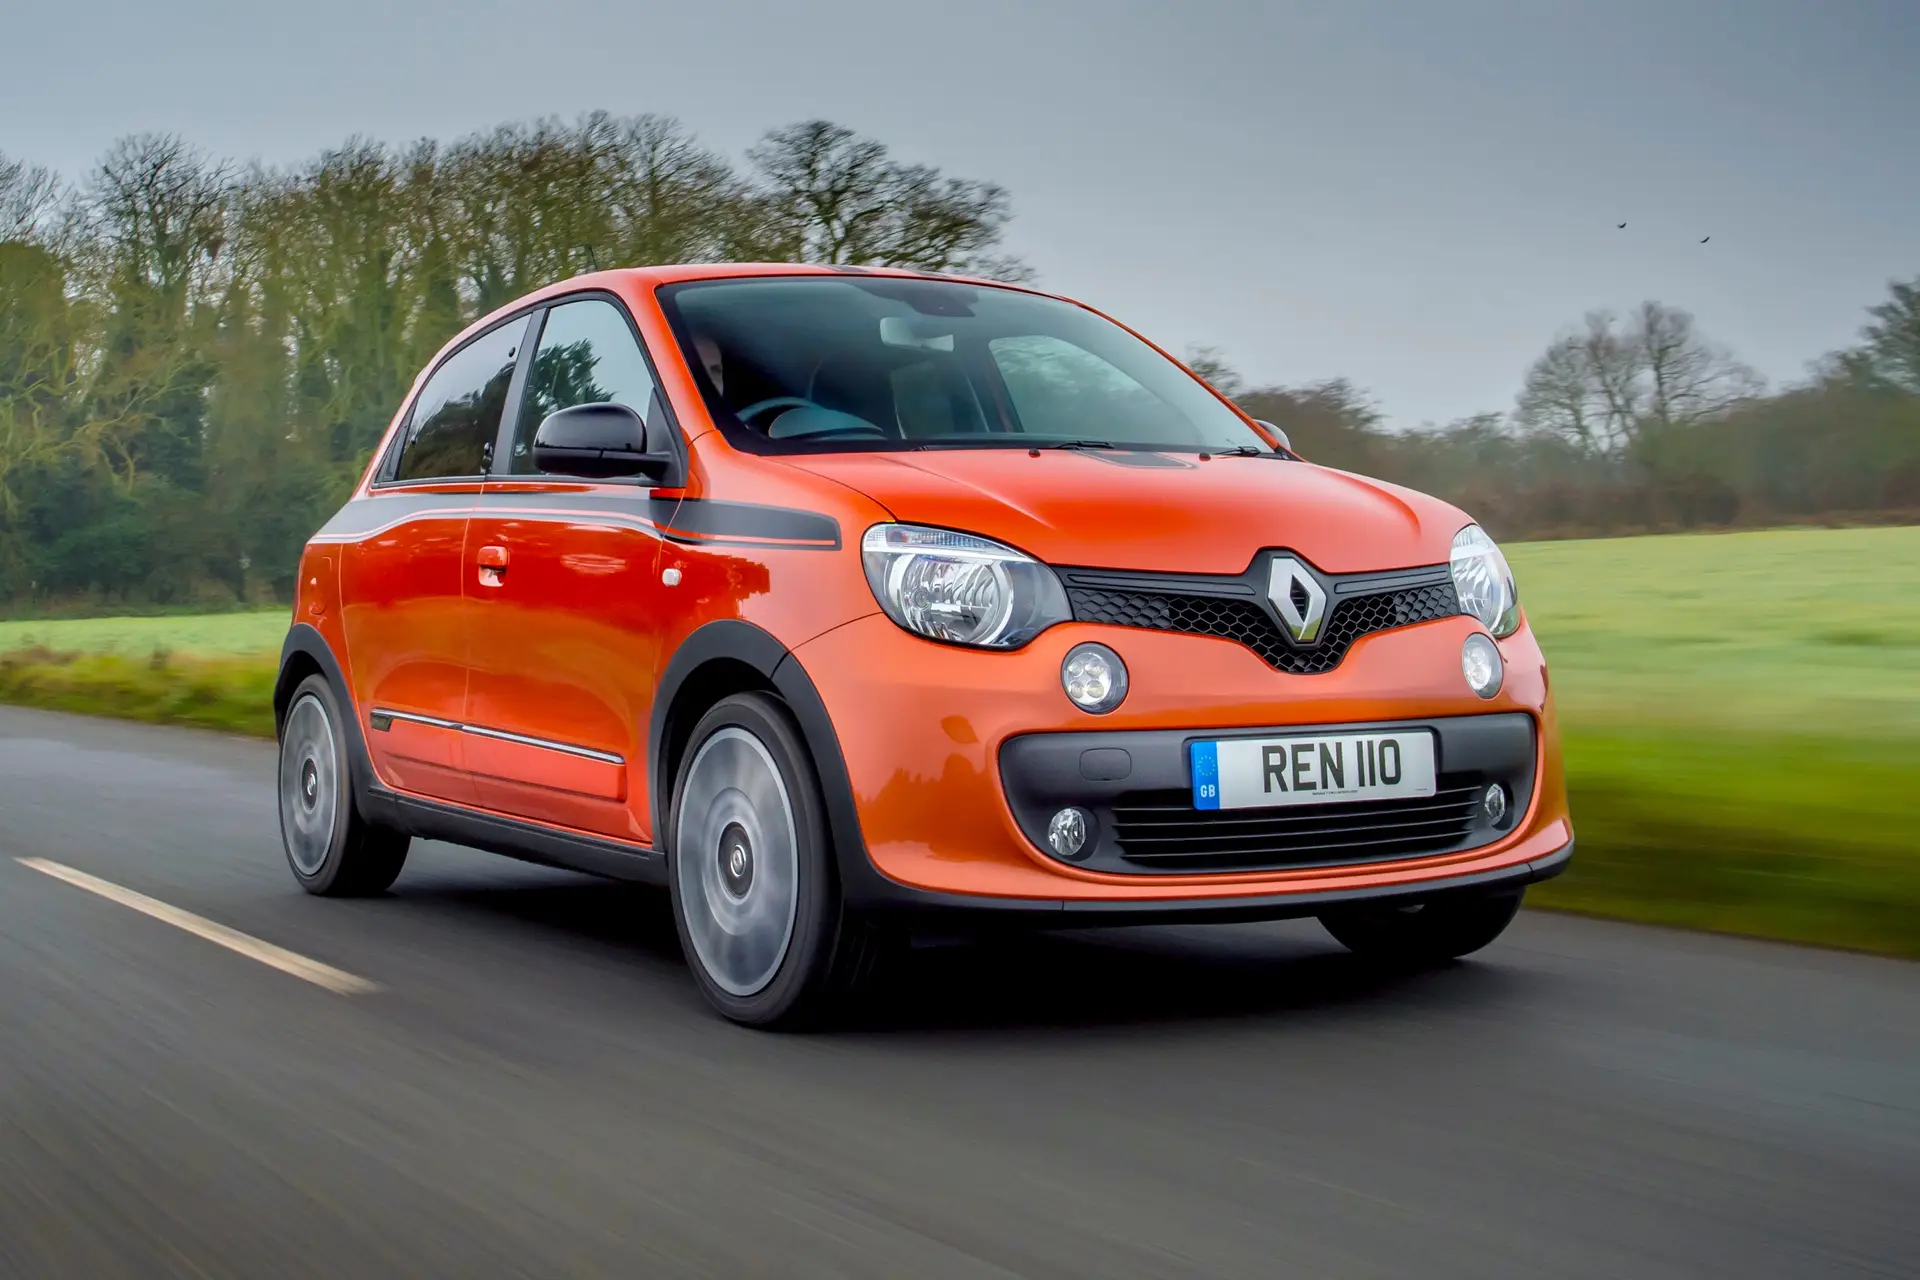 Renault Twingo (2014-2019) Review: exterior front three quarter photo of the Renault Twingo on the road